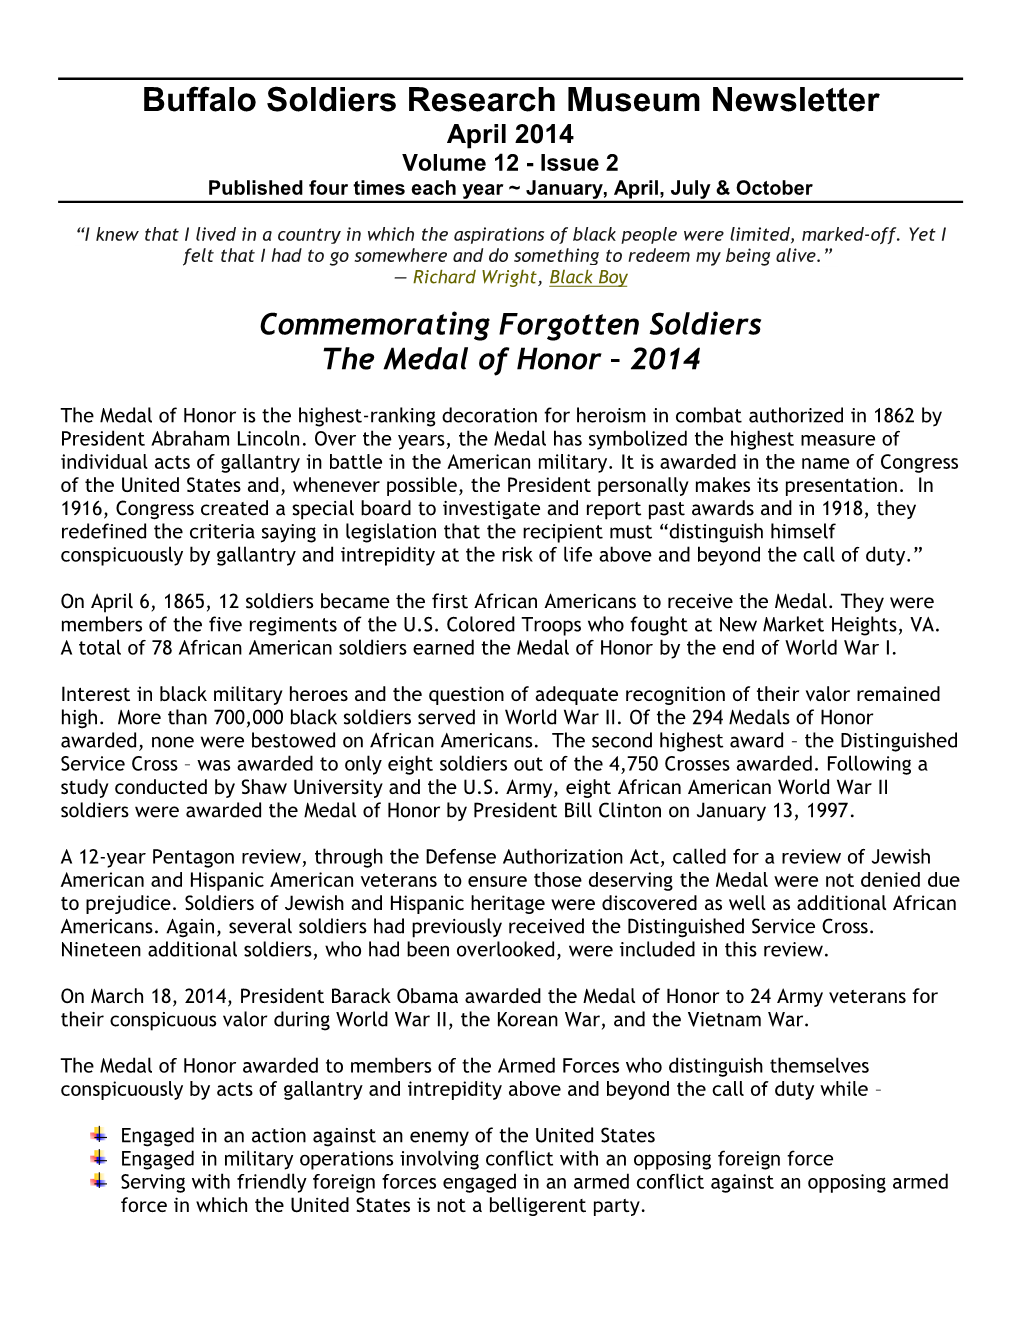 Buffalo Soldiers Research Museum Newsletter April 2014 Volume 12 - Issue 2 Published Four Times Each Year ~ January, April, July & October